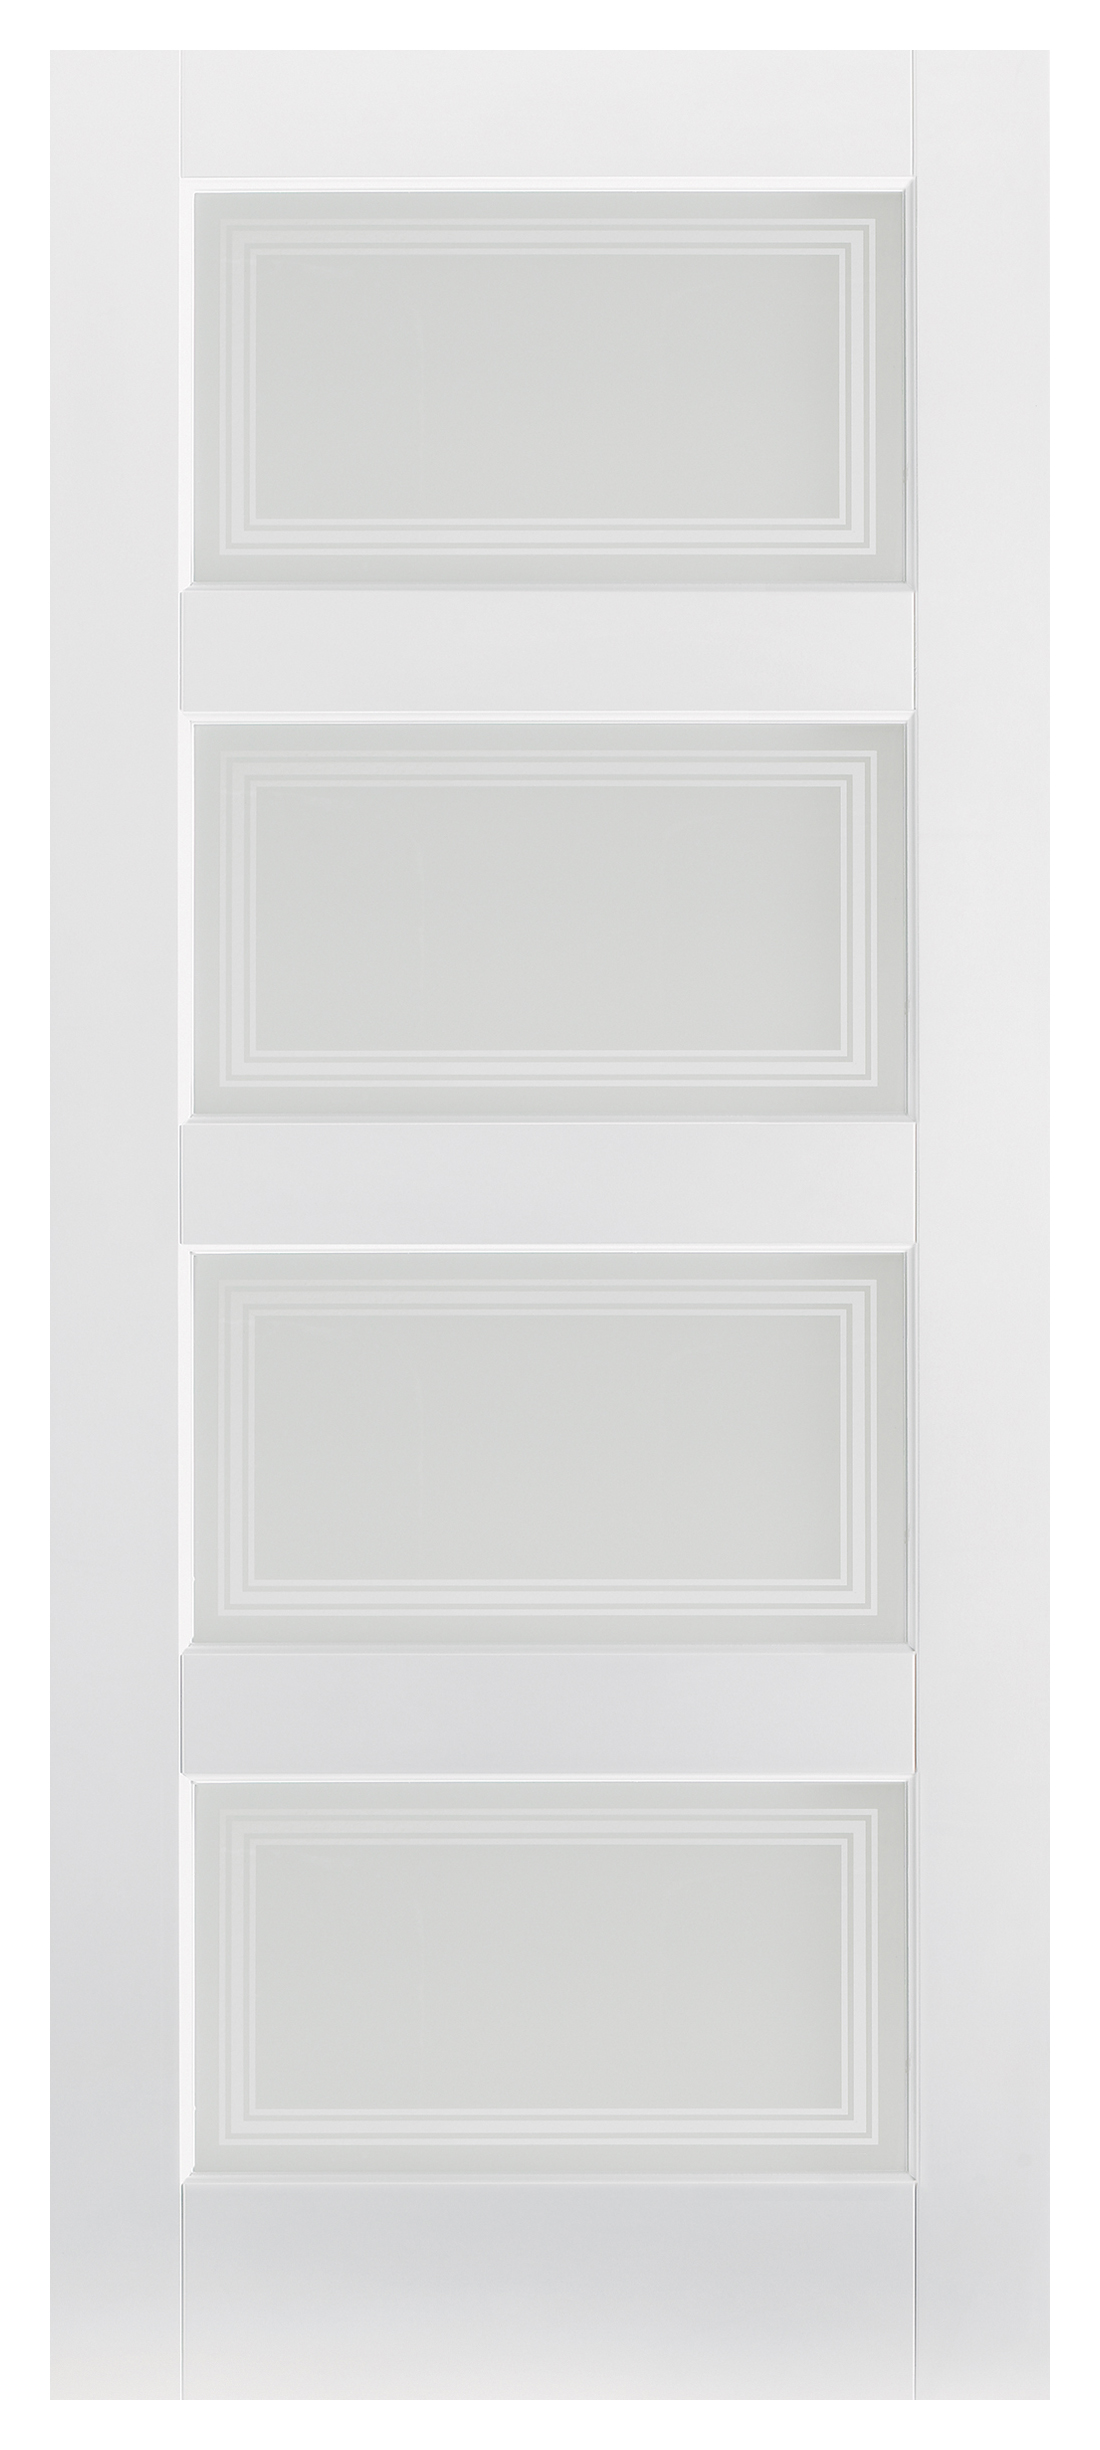 Image of LPD Internal Contemporary 4 Lite Primed White Solid Core Door - 813 x 2032mm